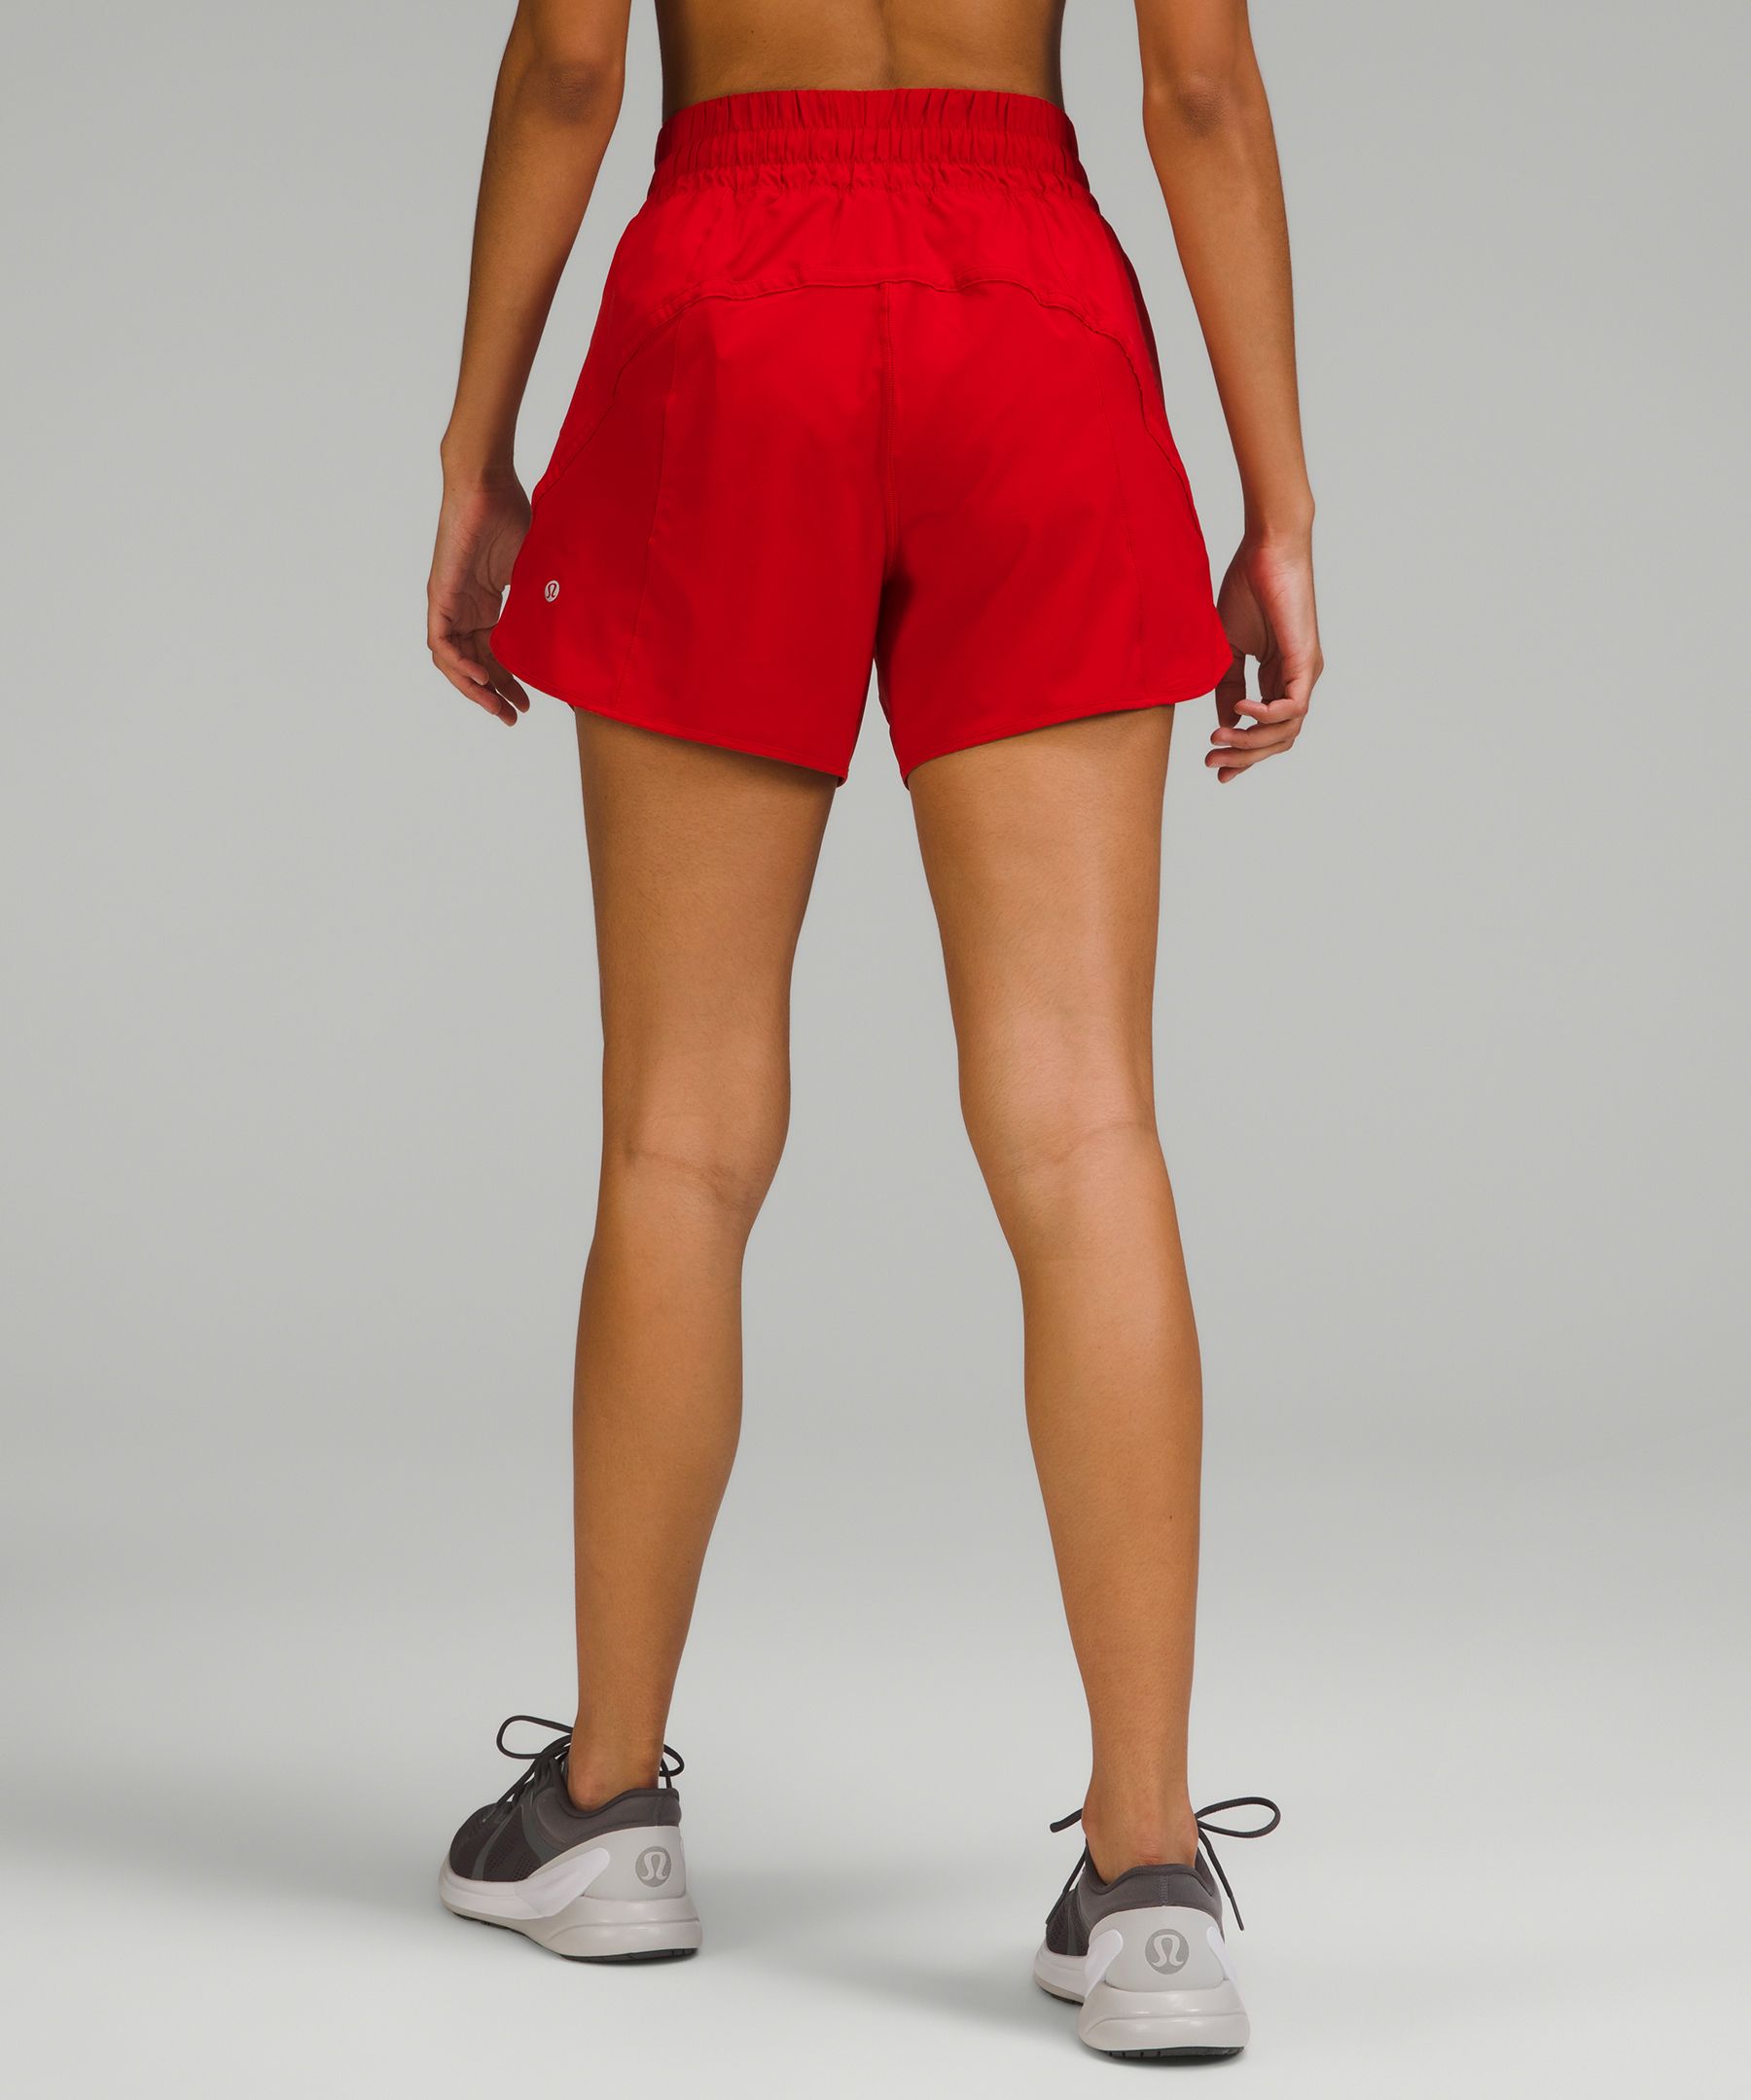 Lululemon athletica Track That High-Rise Lined Short 5, Women's Shorts